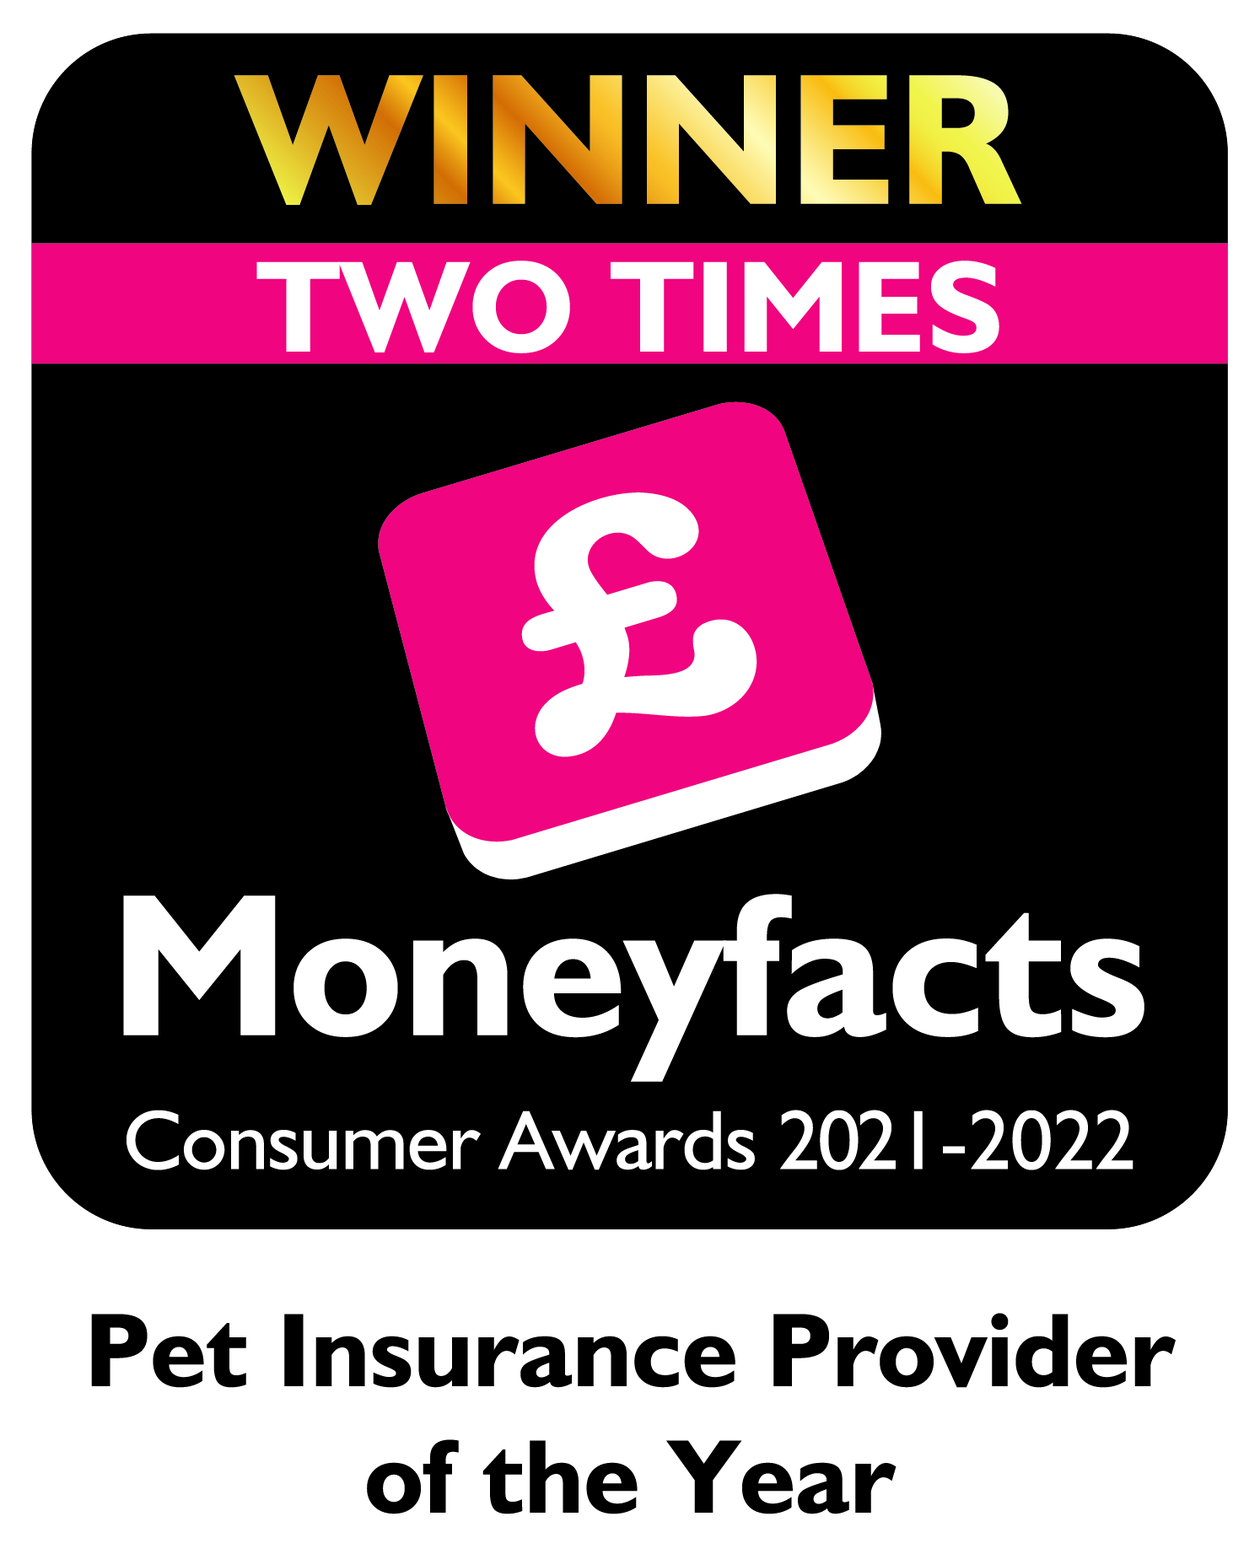 Winner - Two Times Moneyfacts Pet Insurance Provider of the Year